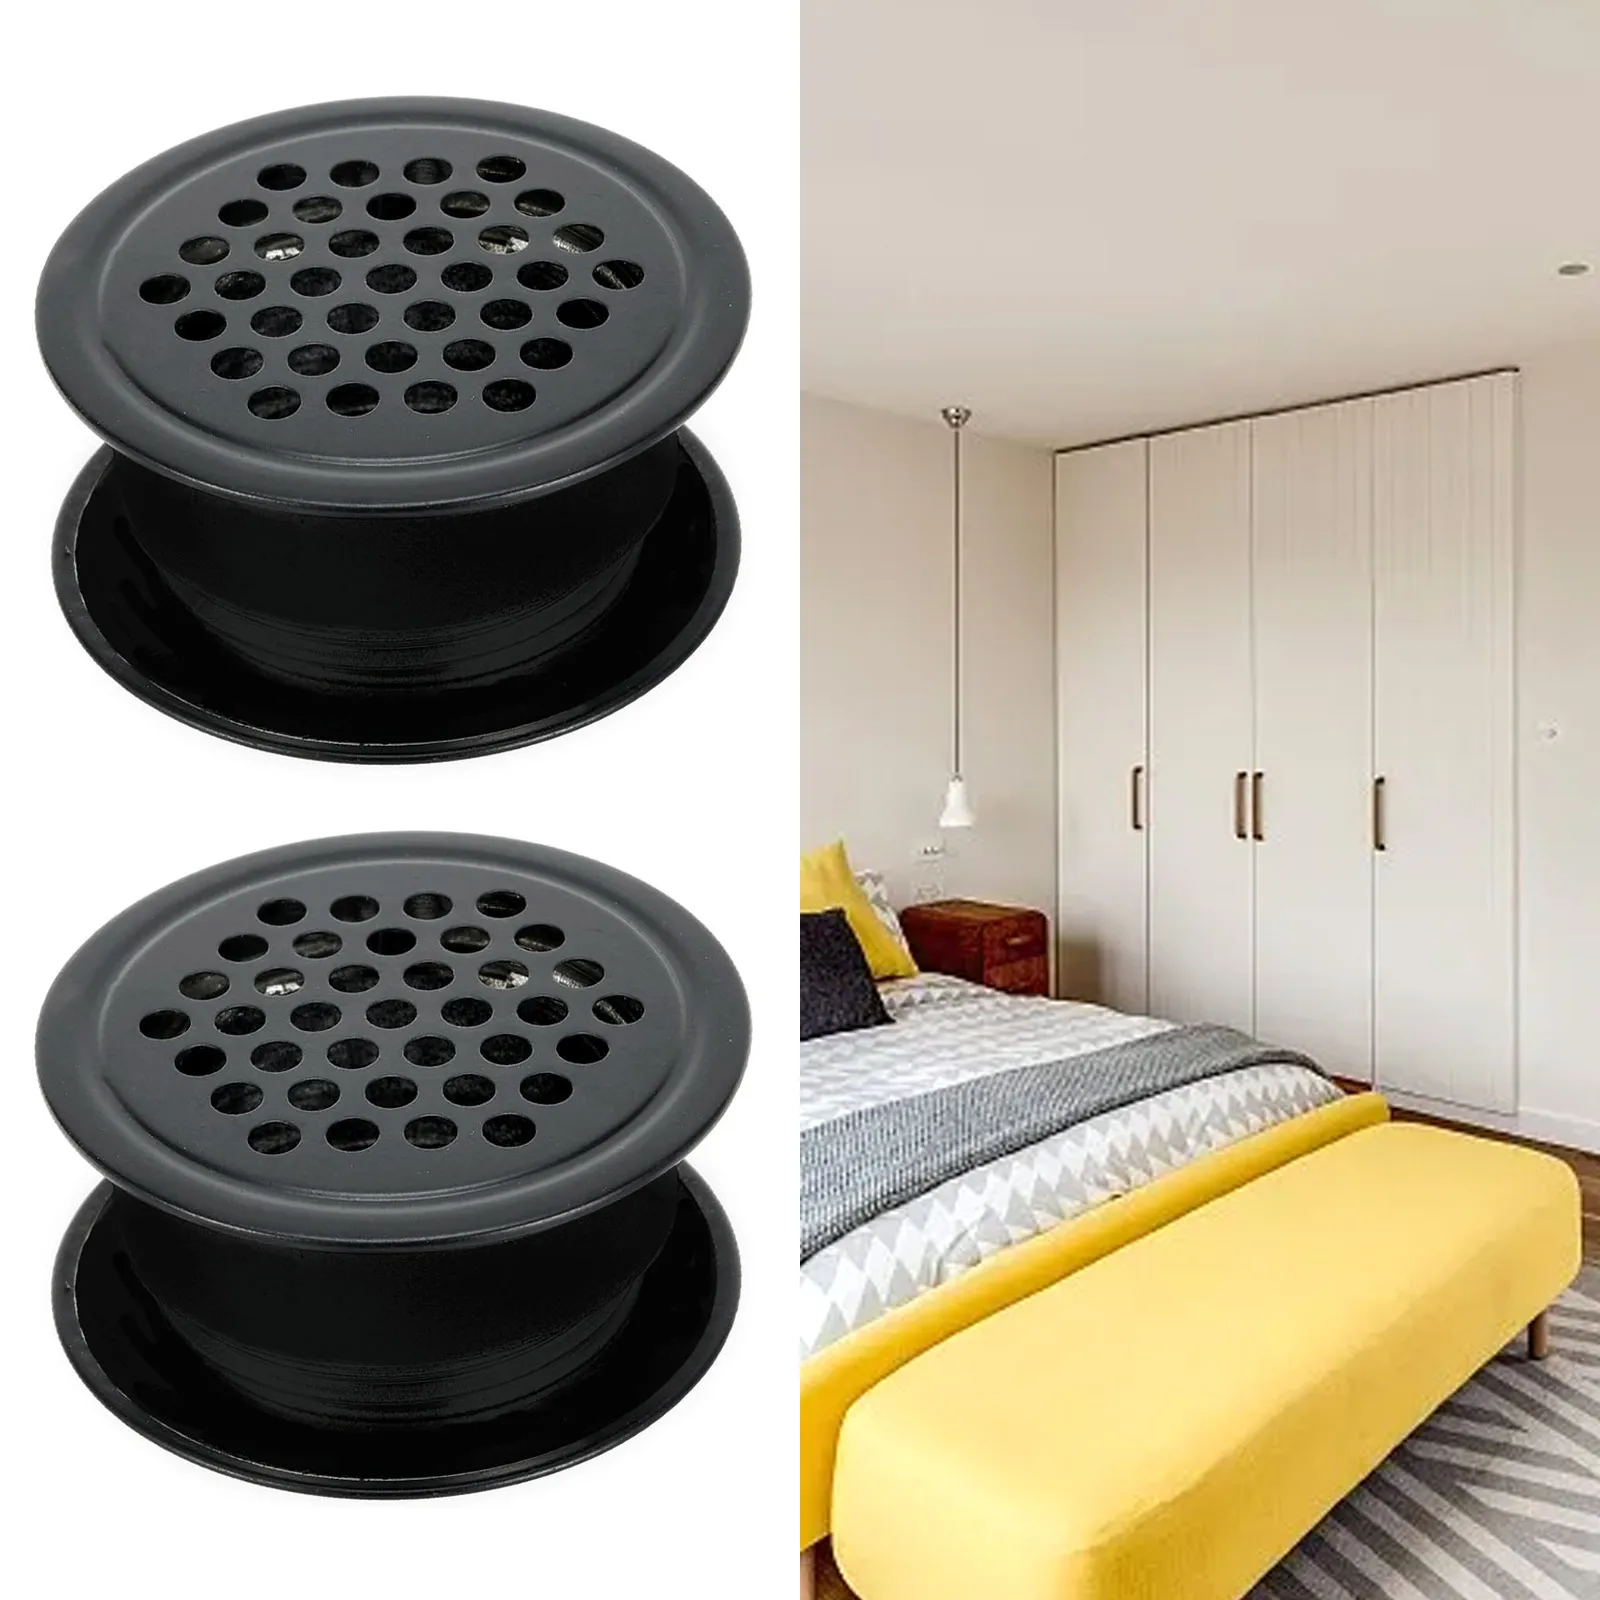 

Round Air Vent Grille Air Vent Grille Wall Air Vent Grille Metal Ventilation Plugs Air Outlet Fresh System Home Office Air Vent